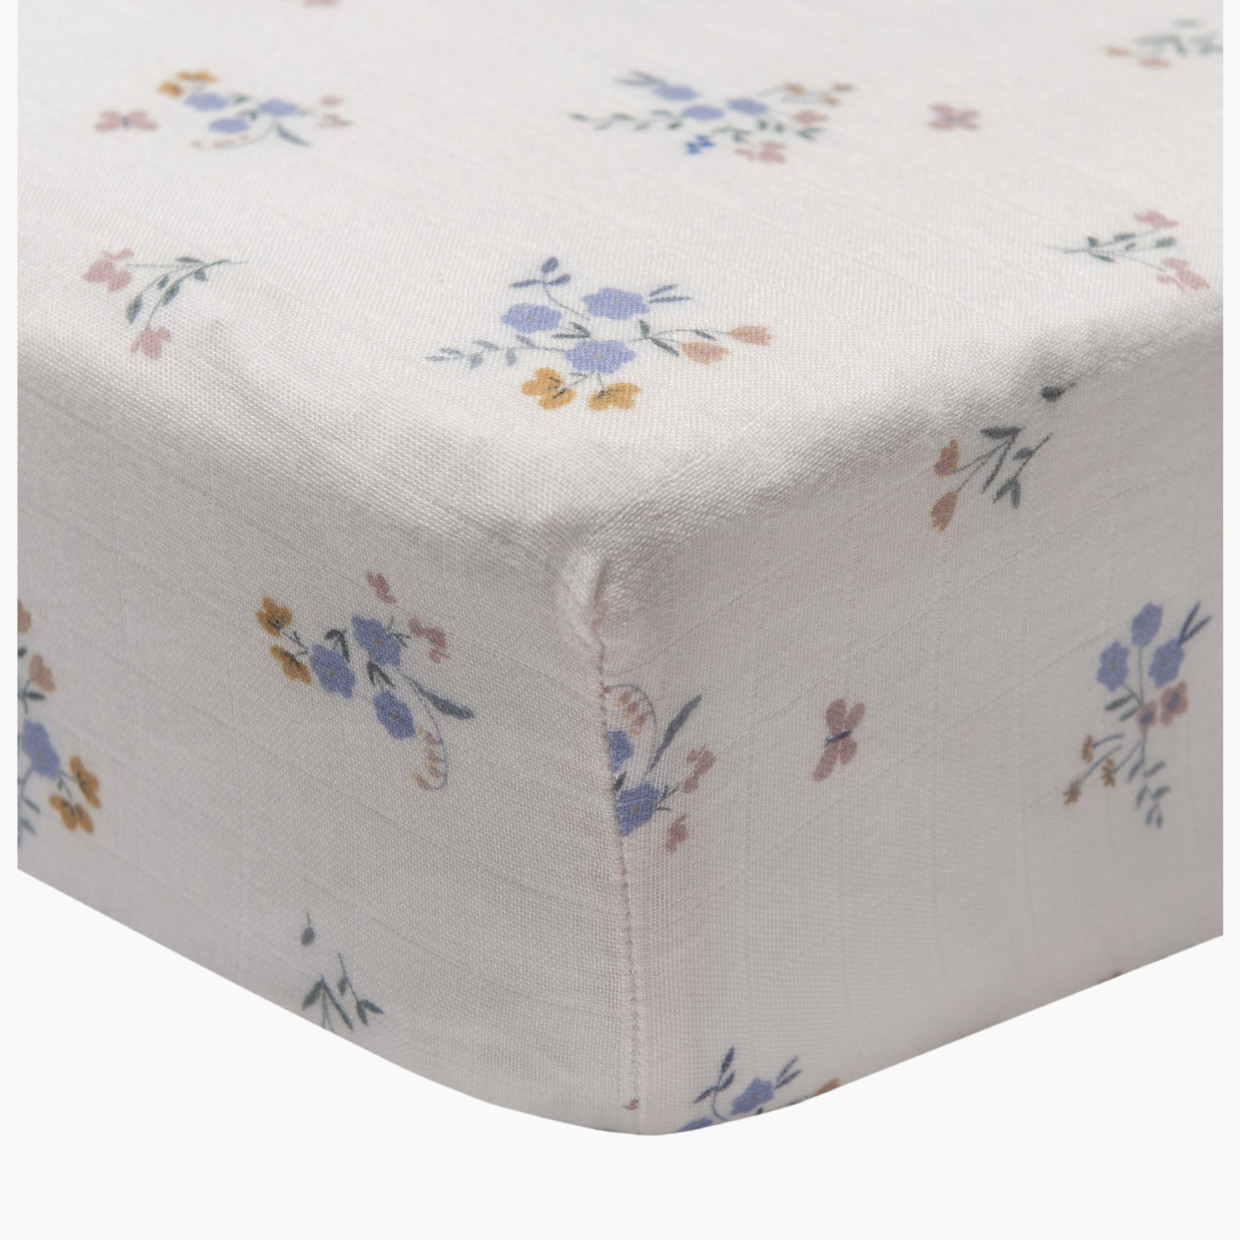 Loulou Lollipop Cotton & Bamboo Fitted Crib Sheet - Ditsy Floral.